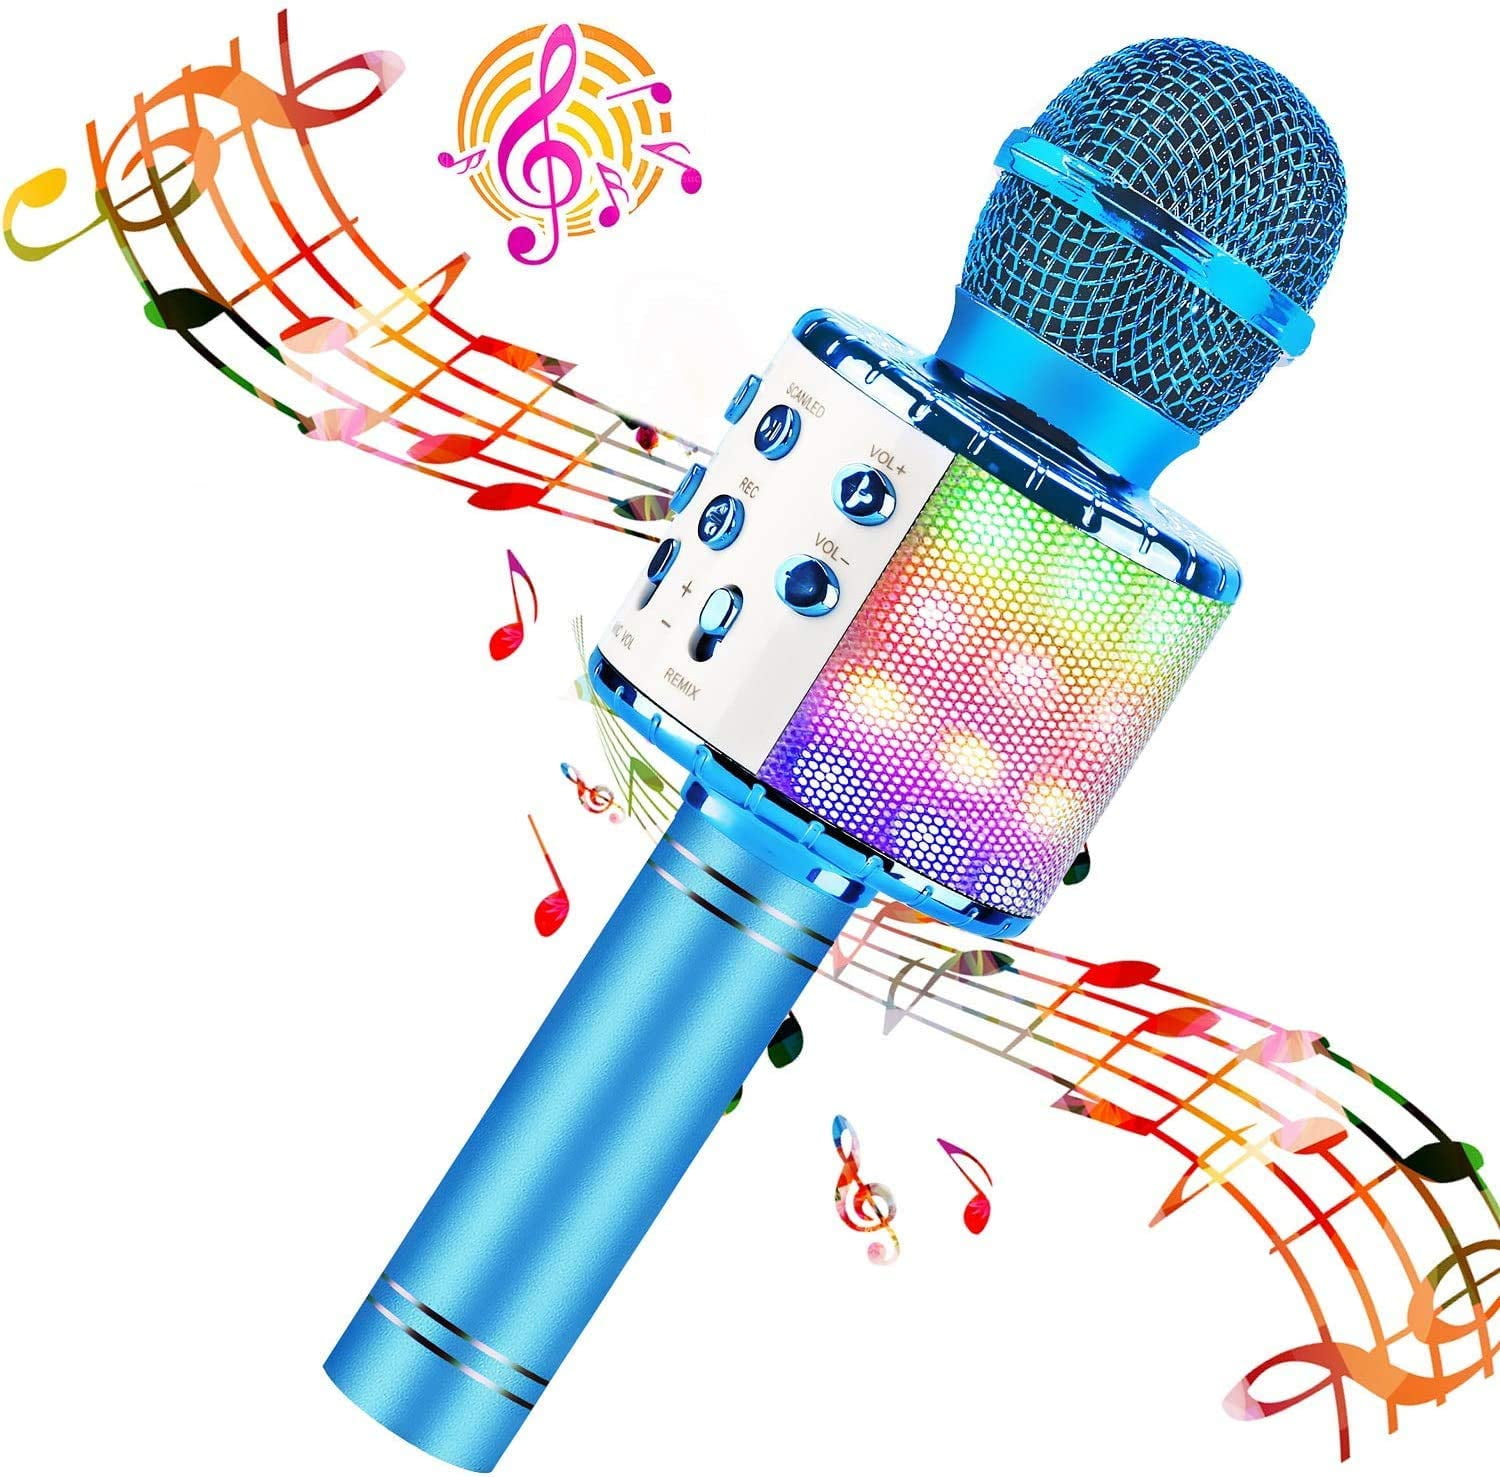 Wireless Bluetooth Karaoke Microphone Portable Handheld Karaoke Mic Speaker with Led Lights for Home Party Birthday Karaoke Microphone for Kids Blue Gift for 4-12 Year Old Girls Boys Singing